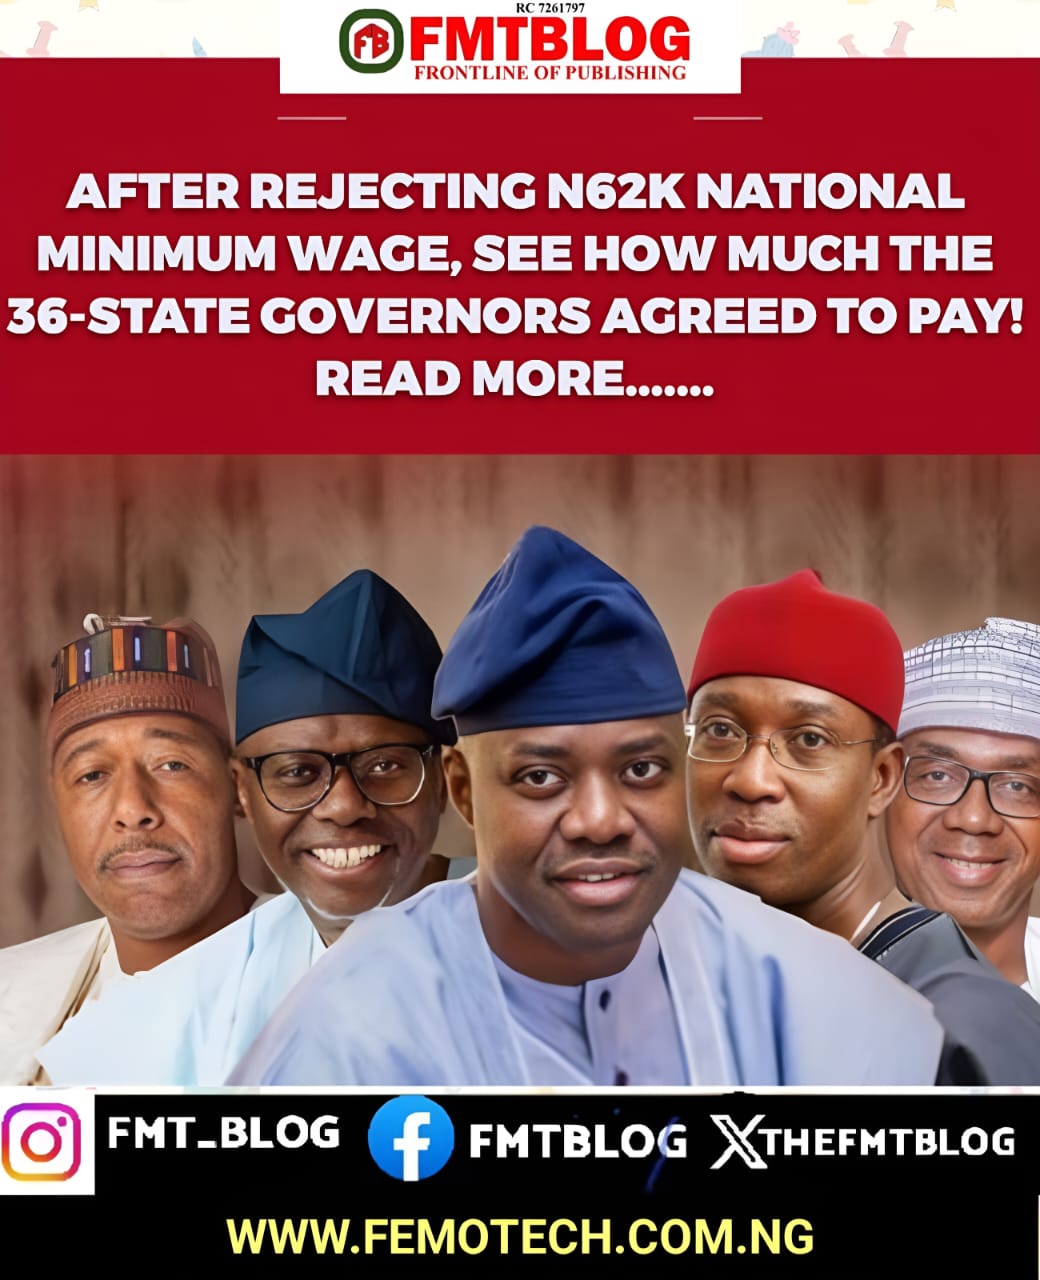 After Rejecting N62K National Minimum Wage, See How Much The 36-State Governors Agreed To Pay!